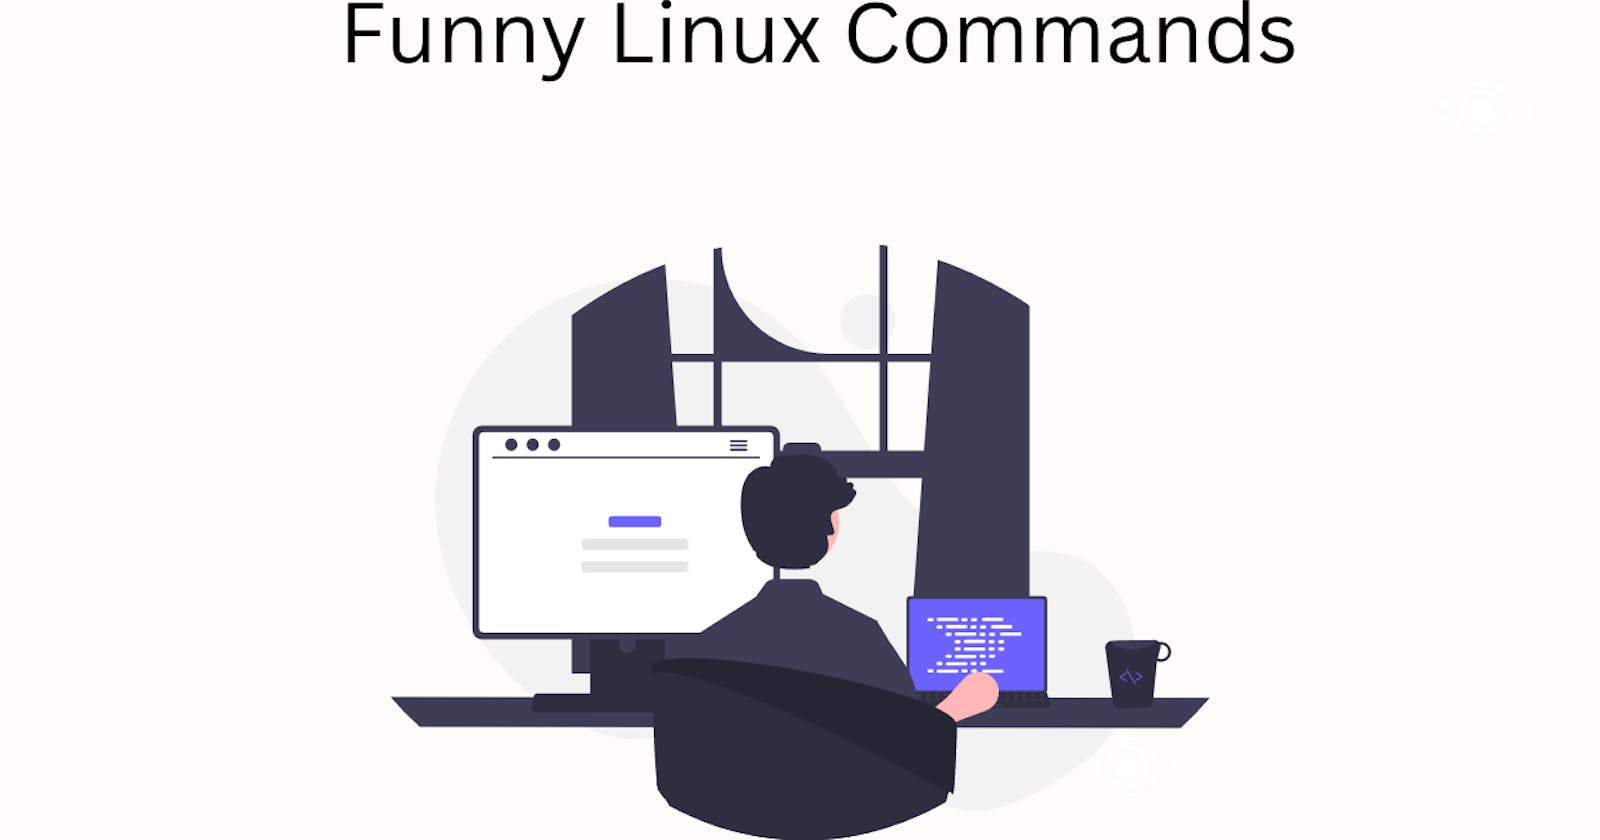 4 Funny Linux commands you should definitely try!